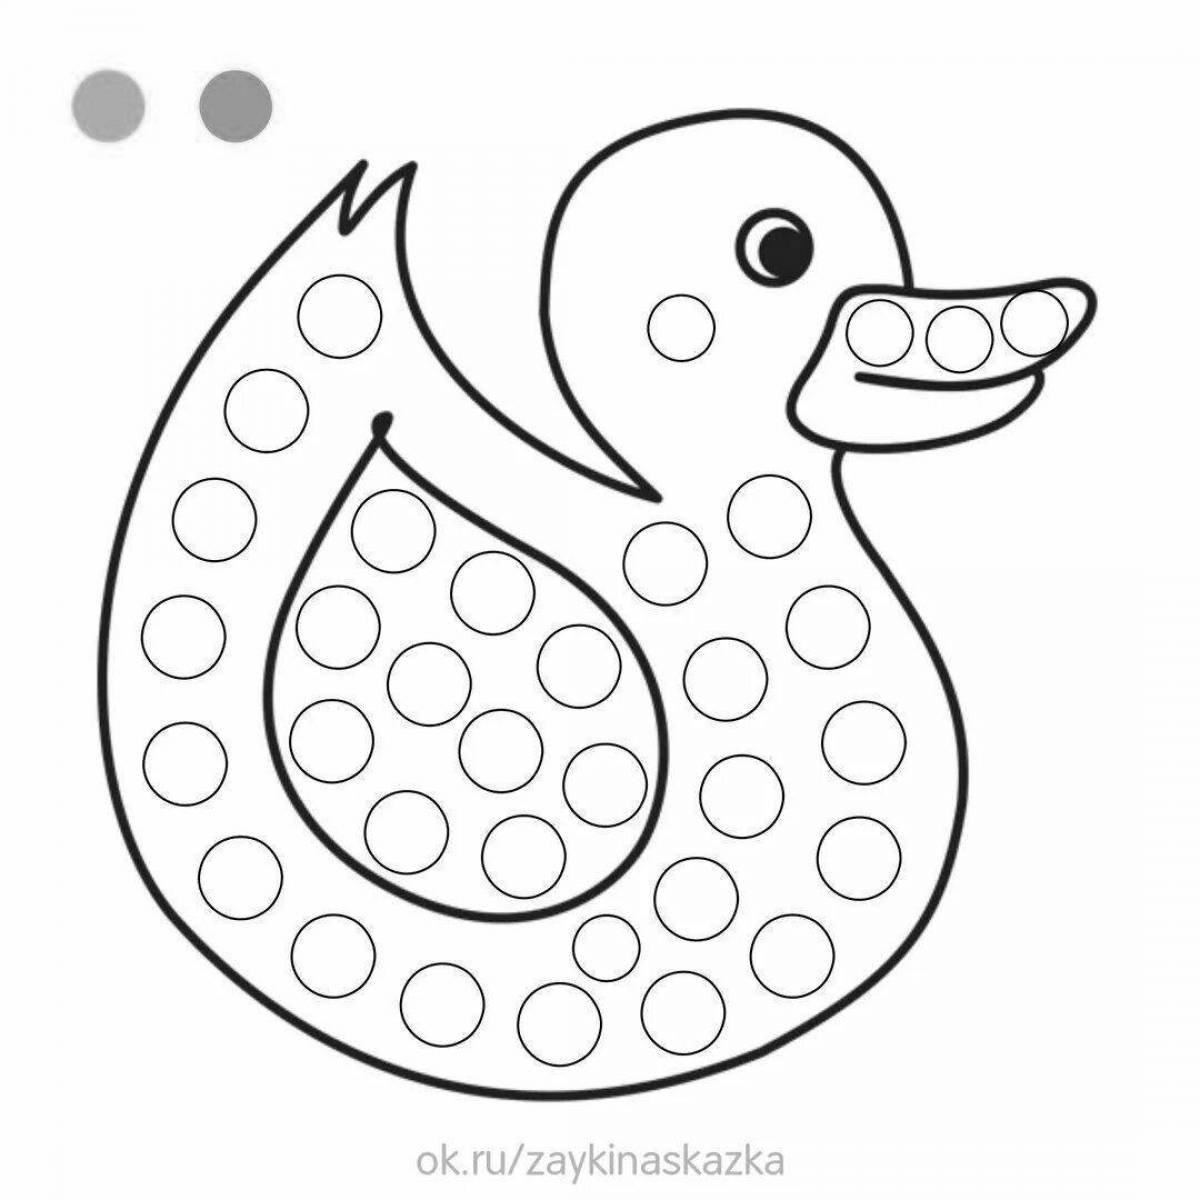 Playful finger coloring page for 4-5 year olds